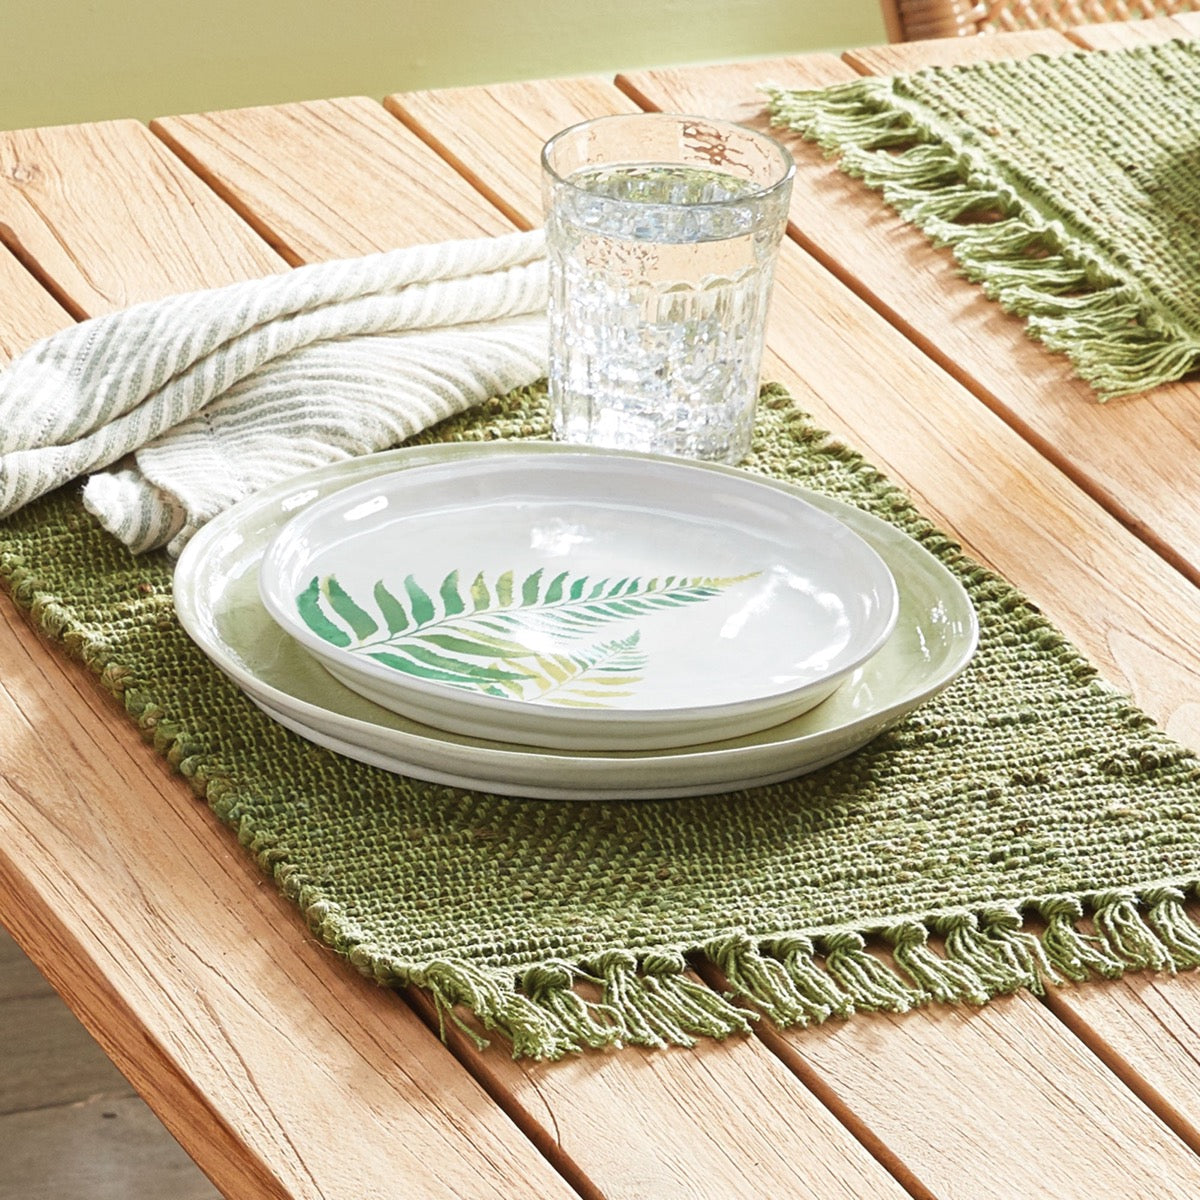 Woven Fringe Placemat - Green. Top view.